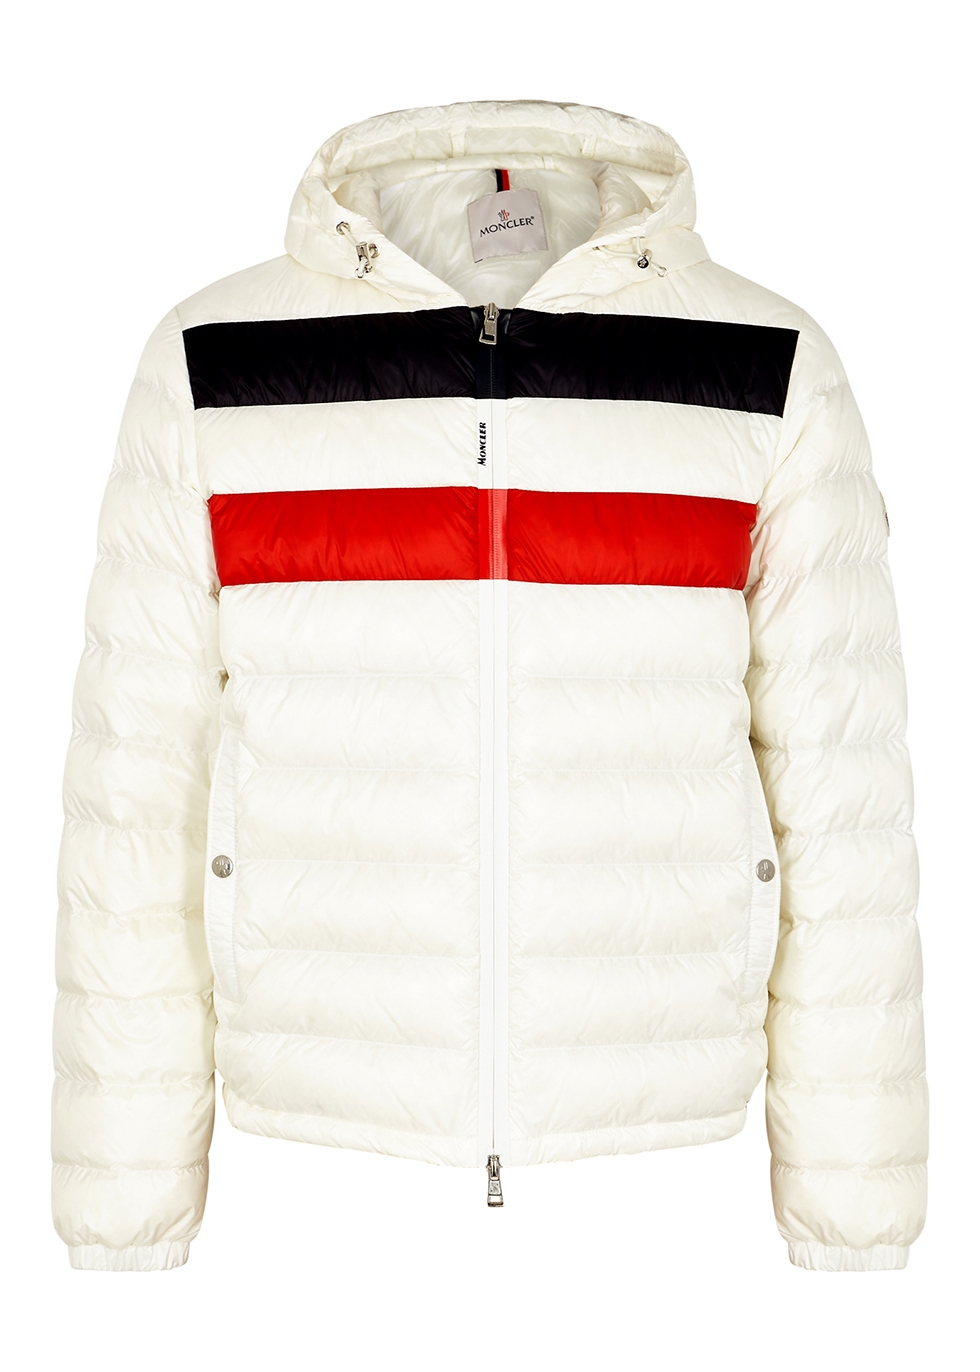 moncler jacket red white and blue